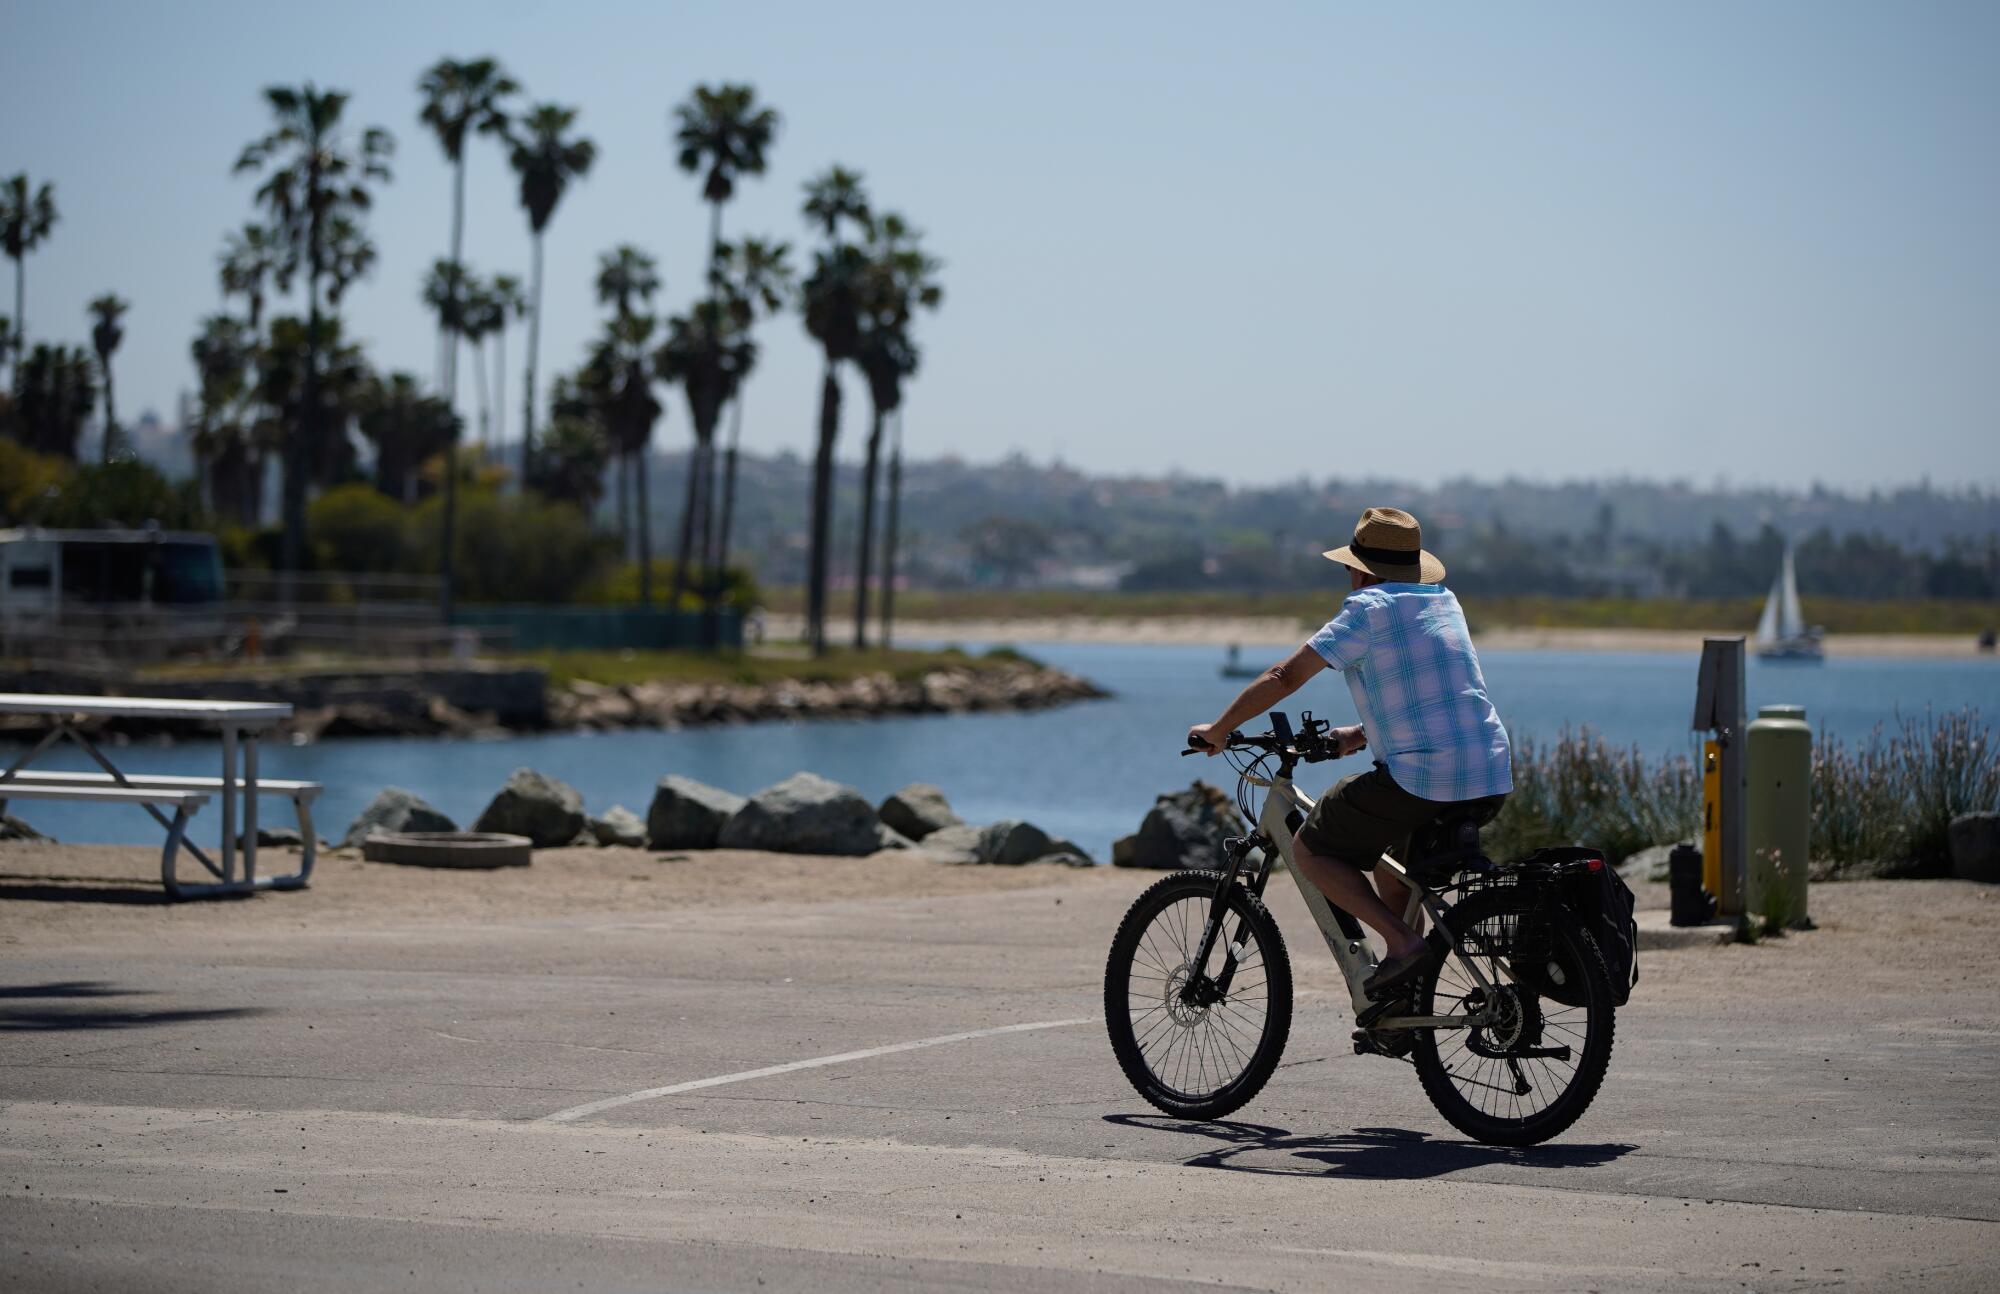 A man in a brimmed hat rides a bicycle on a road along the bay, palm trees and a sailboat in the distance.